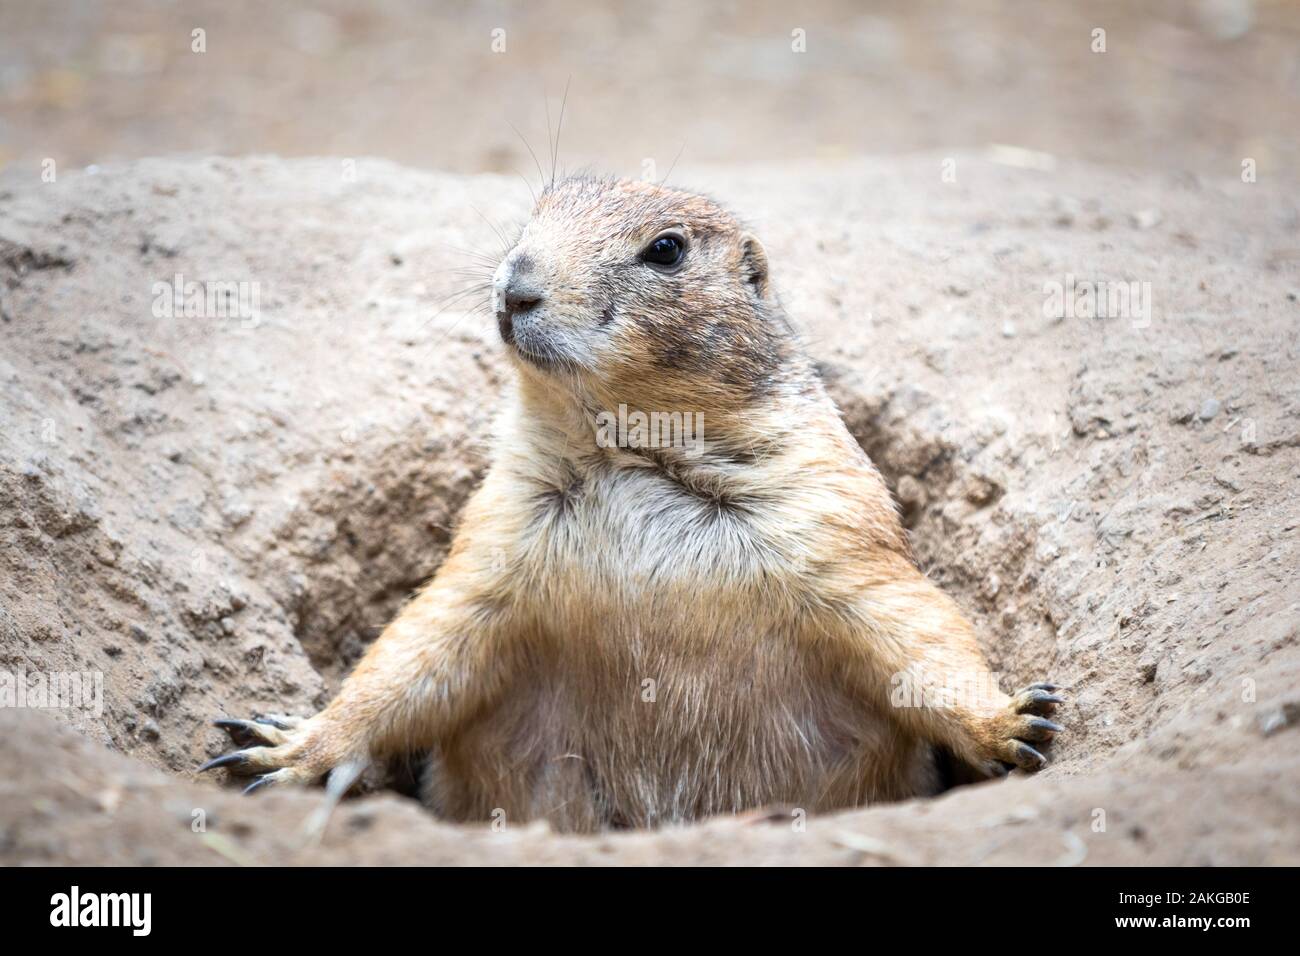 Close up portrait of a prairie dog emerging from its burrow and surveilling the surroundings Stock Photo